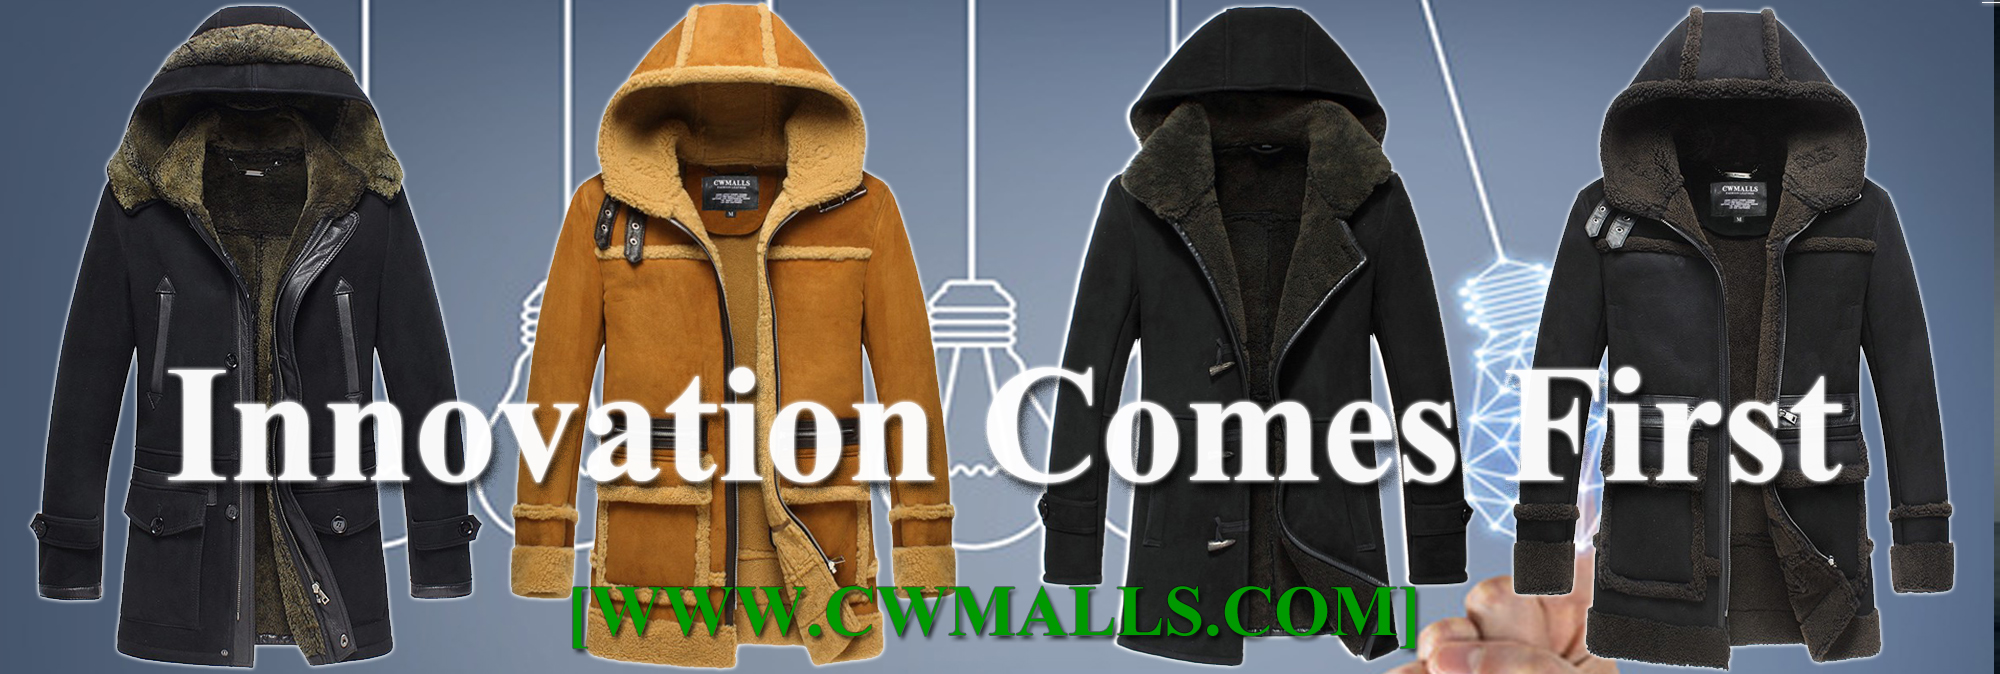 Innovation Comes First sheepskin coat